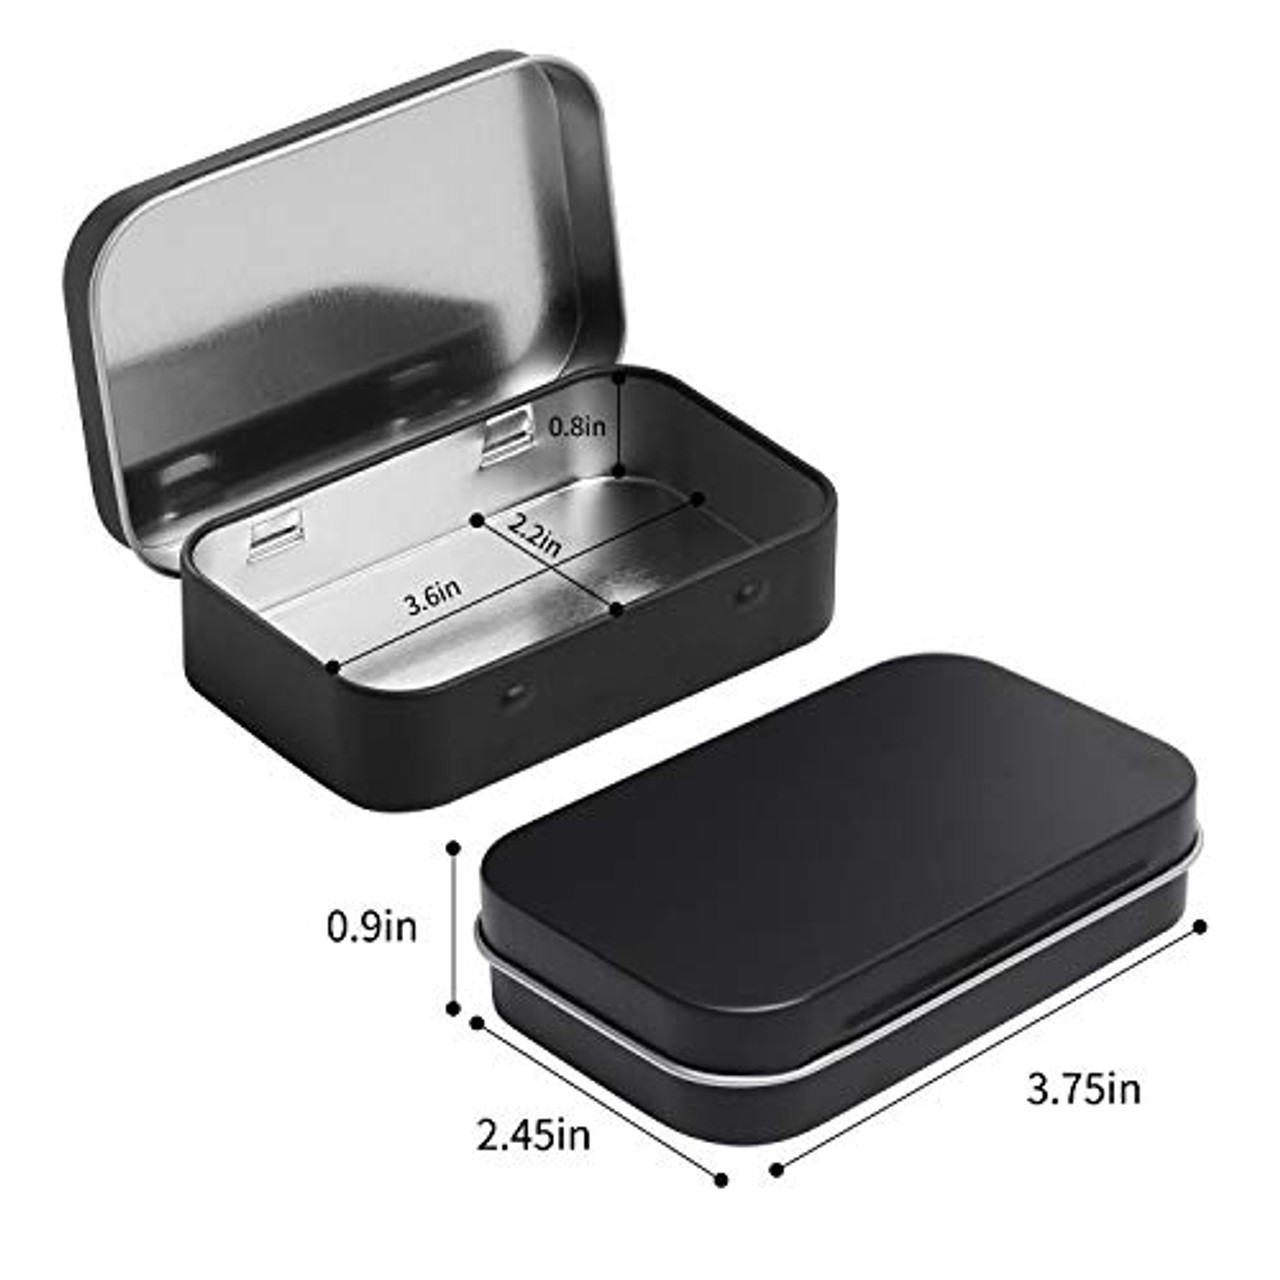 Metal Tin Box Containers 4 Pack with Hinge Lids